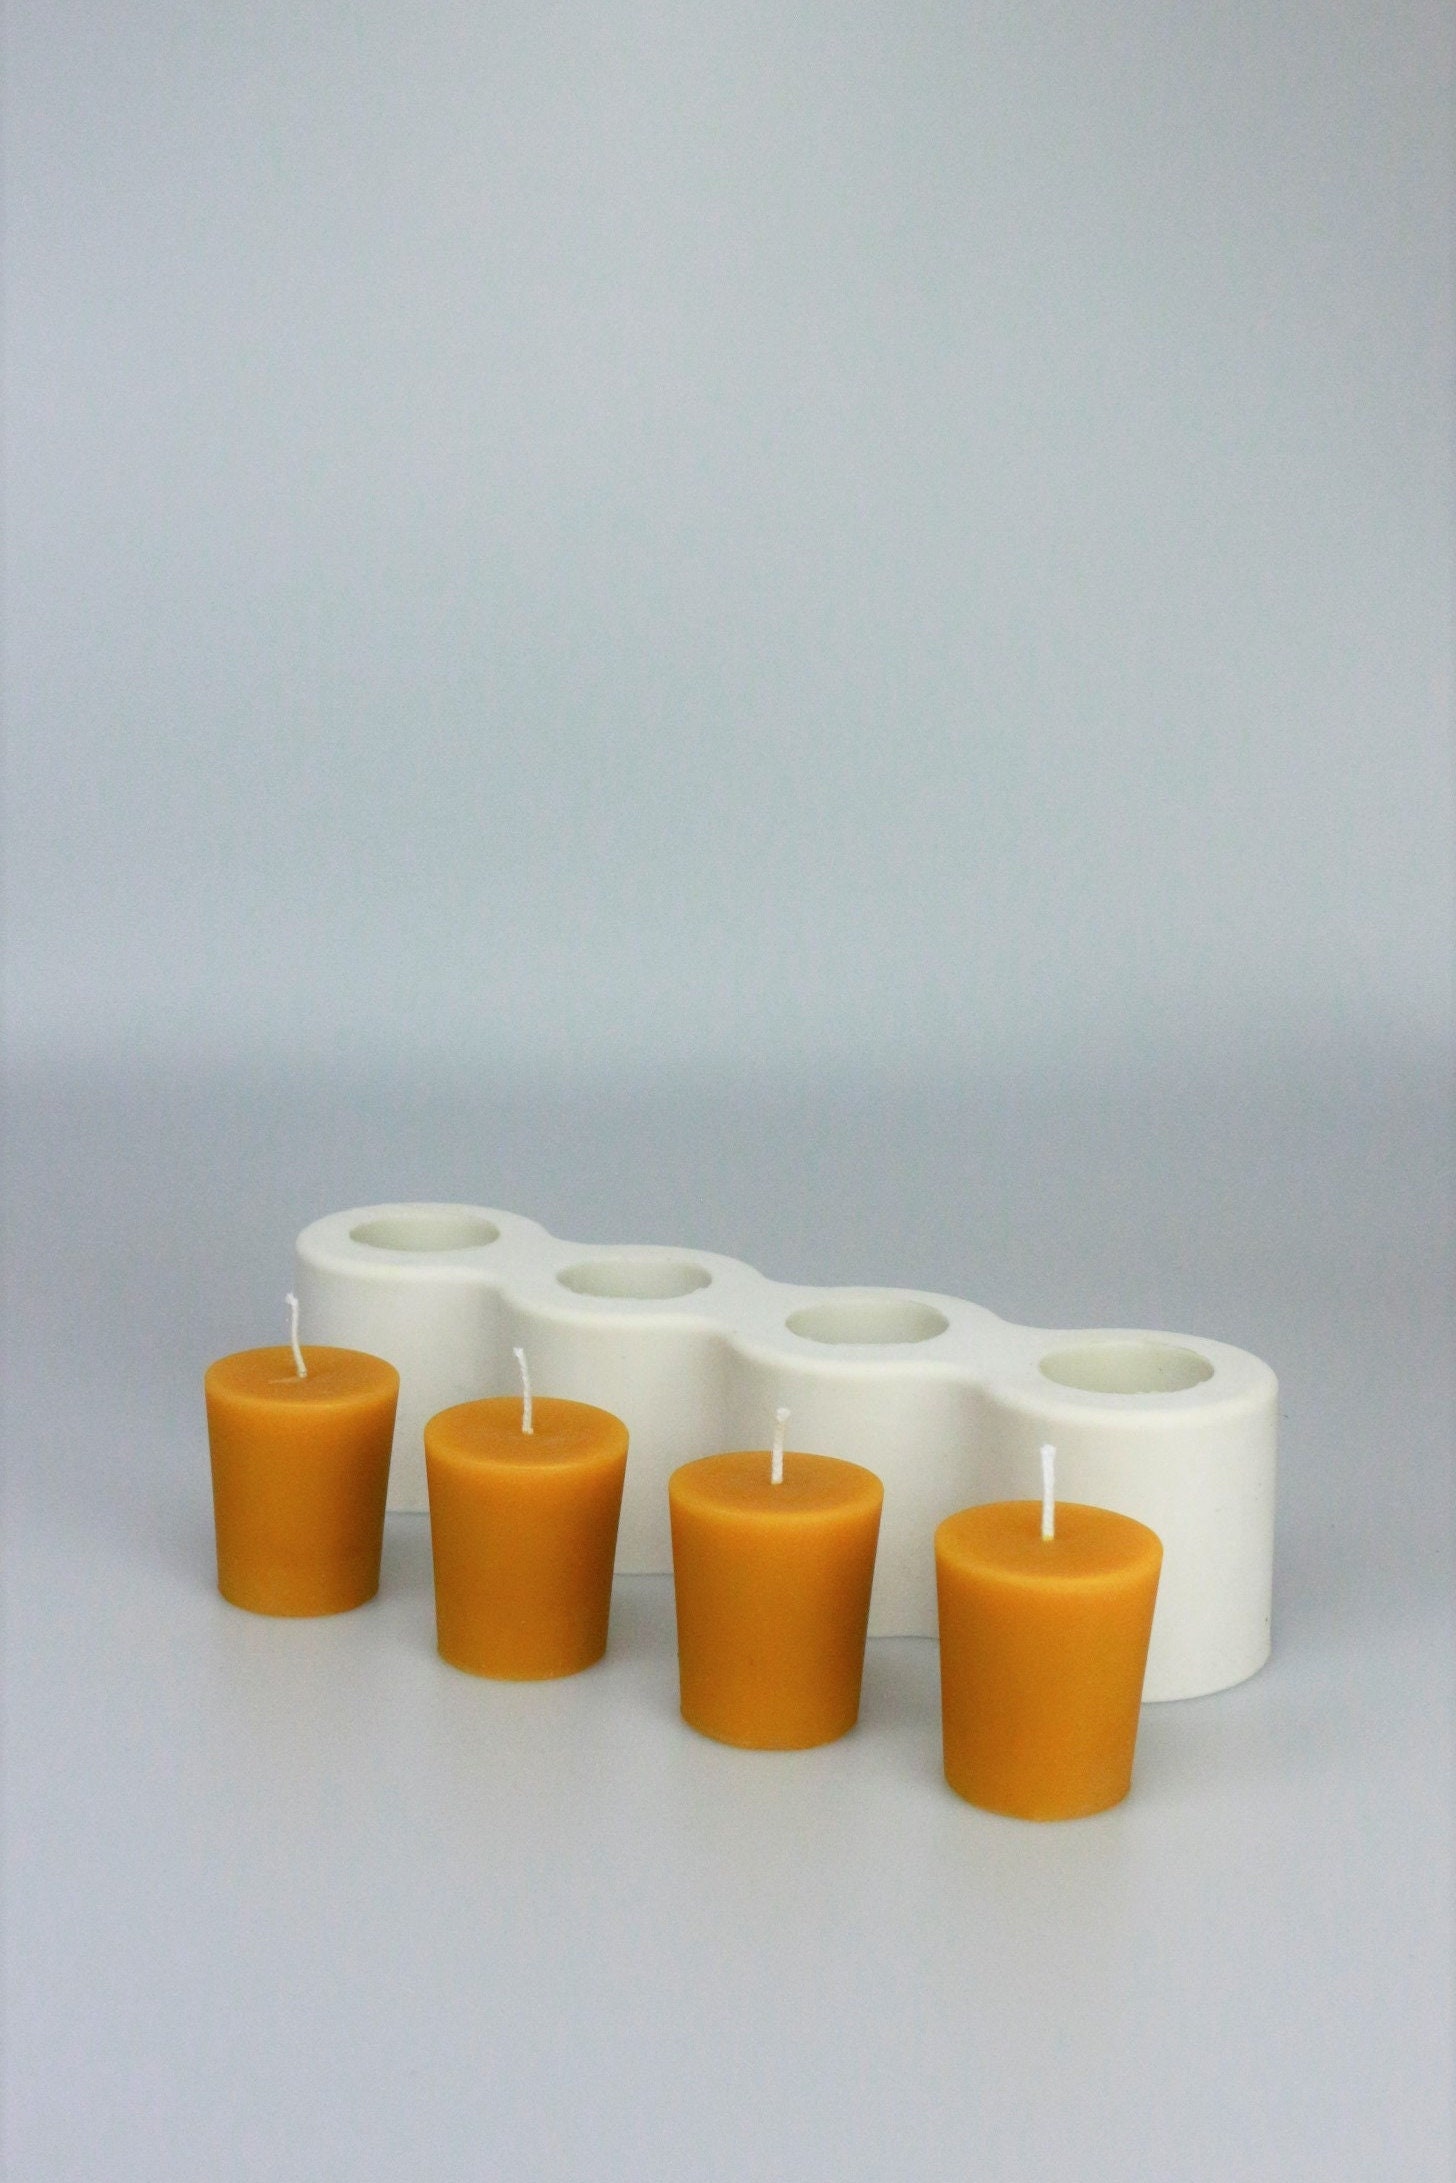 Craft plastique rigide S7619 10 x Seamless votive Candle Making moules UK MADE 